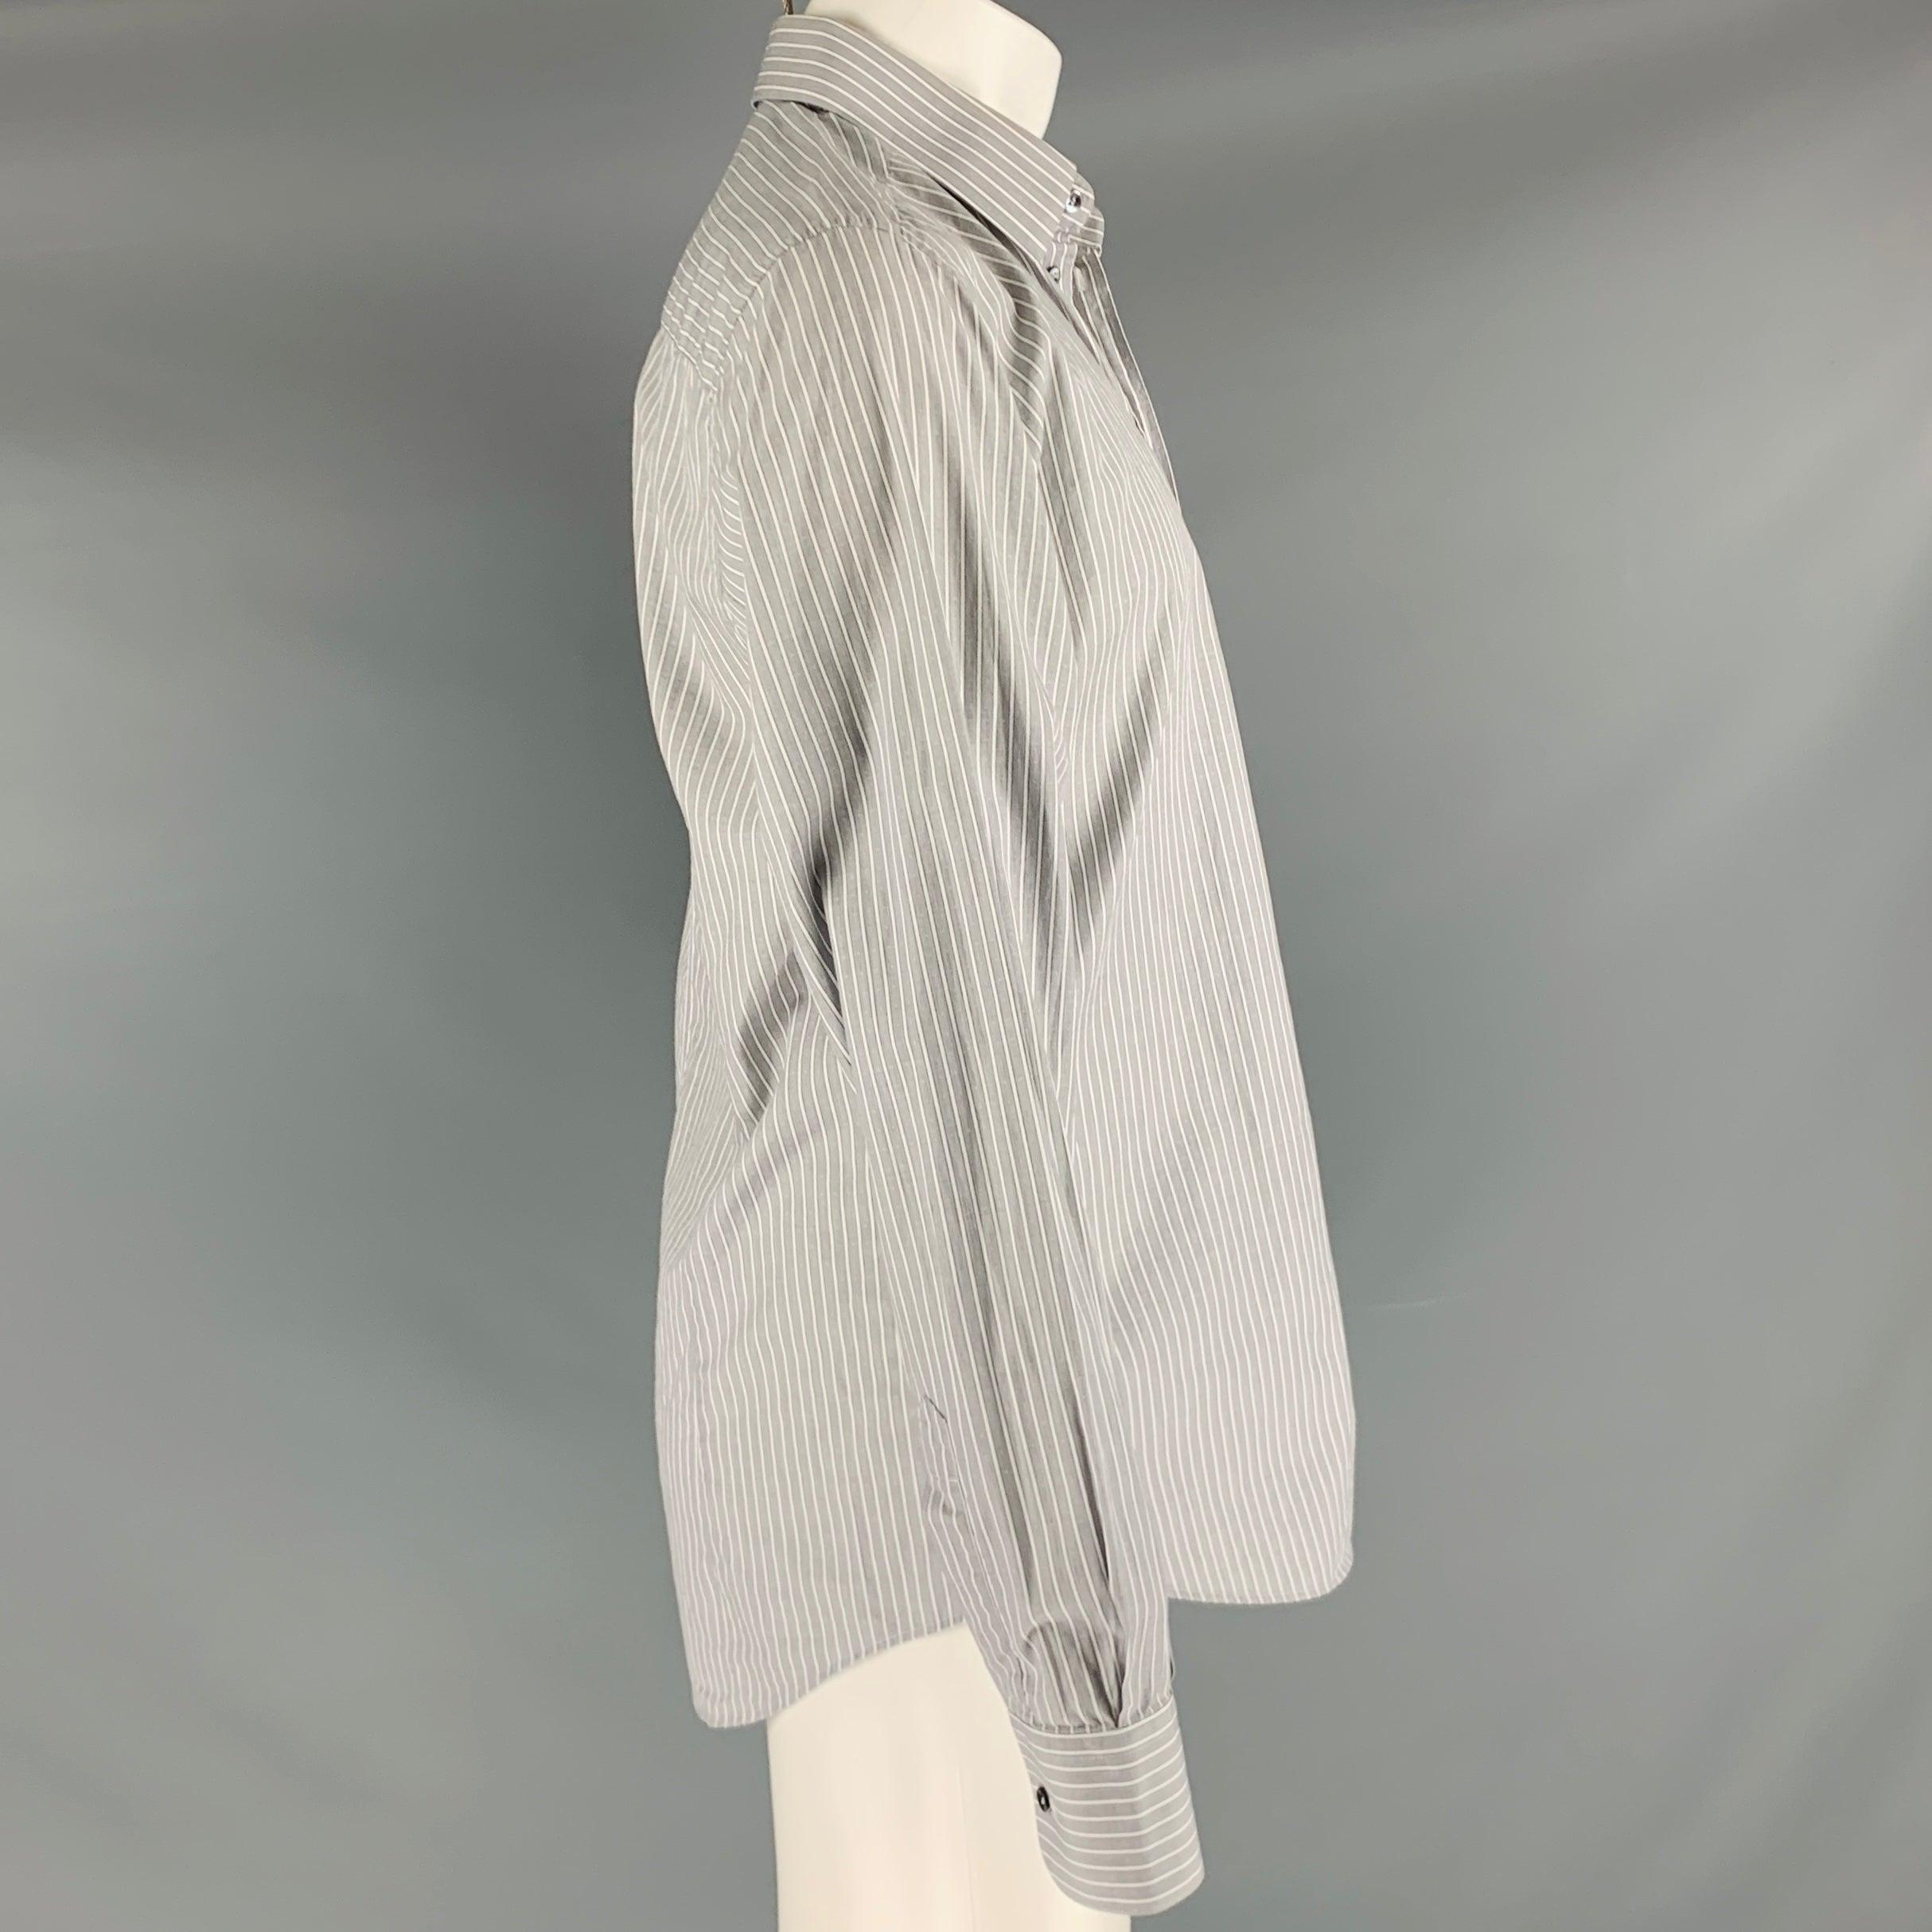 DOLCE & GABBANA Size M Grey White Stripe Cotton Button Up Long Sleeve Shirt In Excellent Condition For Sale In San Francisco, CA